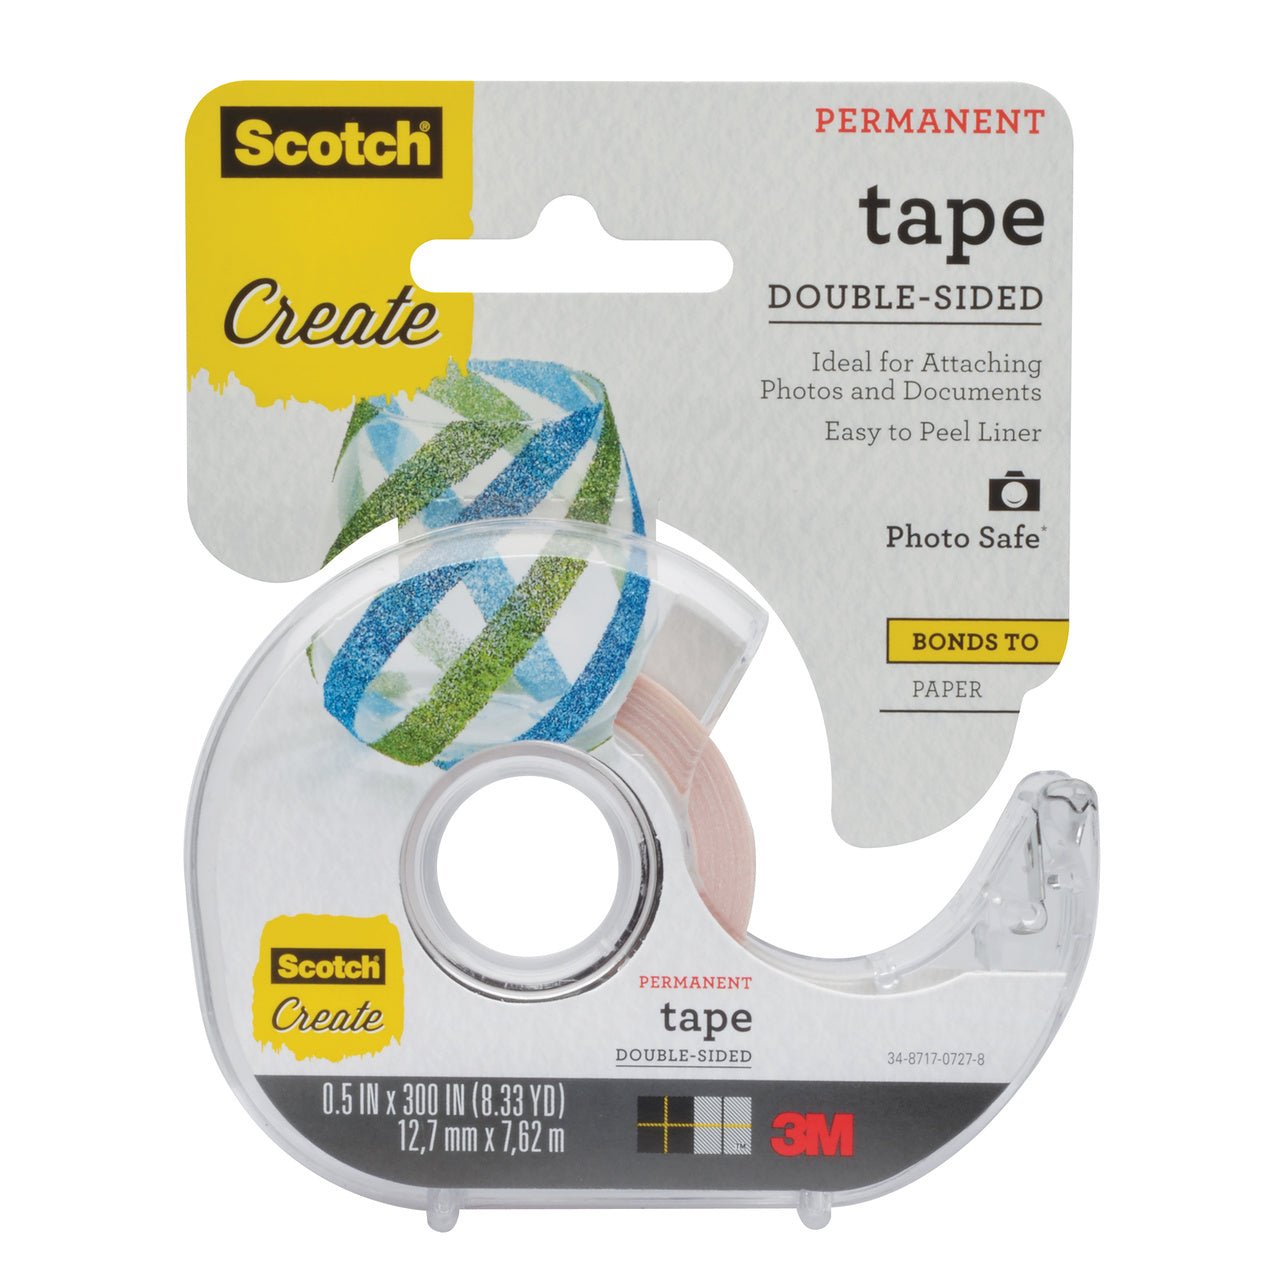 Scotch Create Double Sided Permanent Tape .5x300 inch - merriartist.com